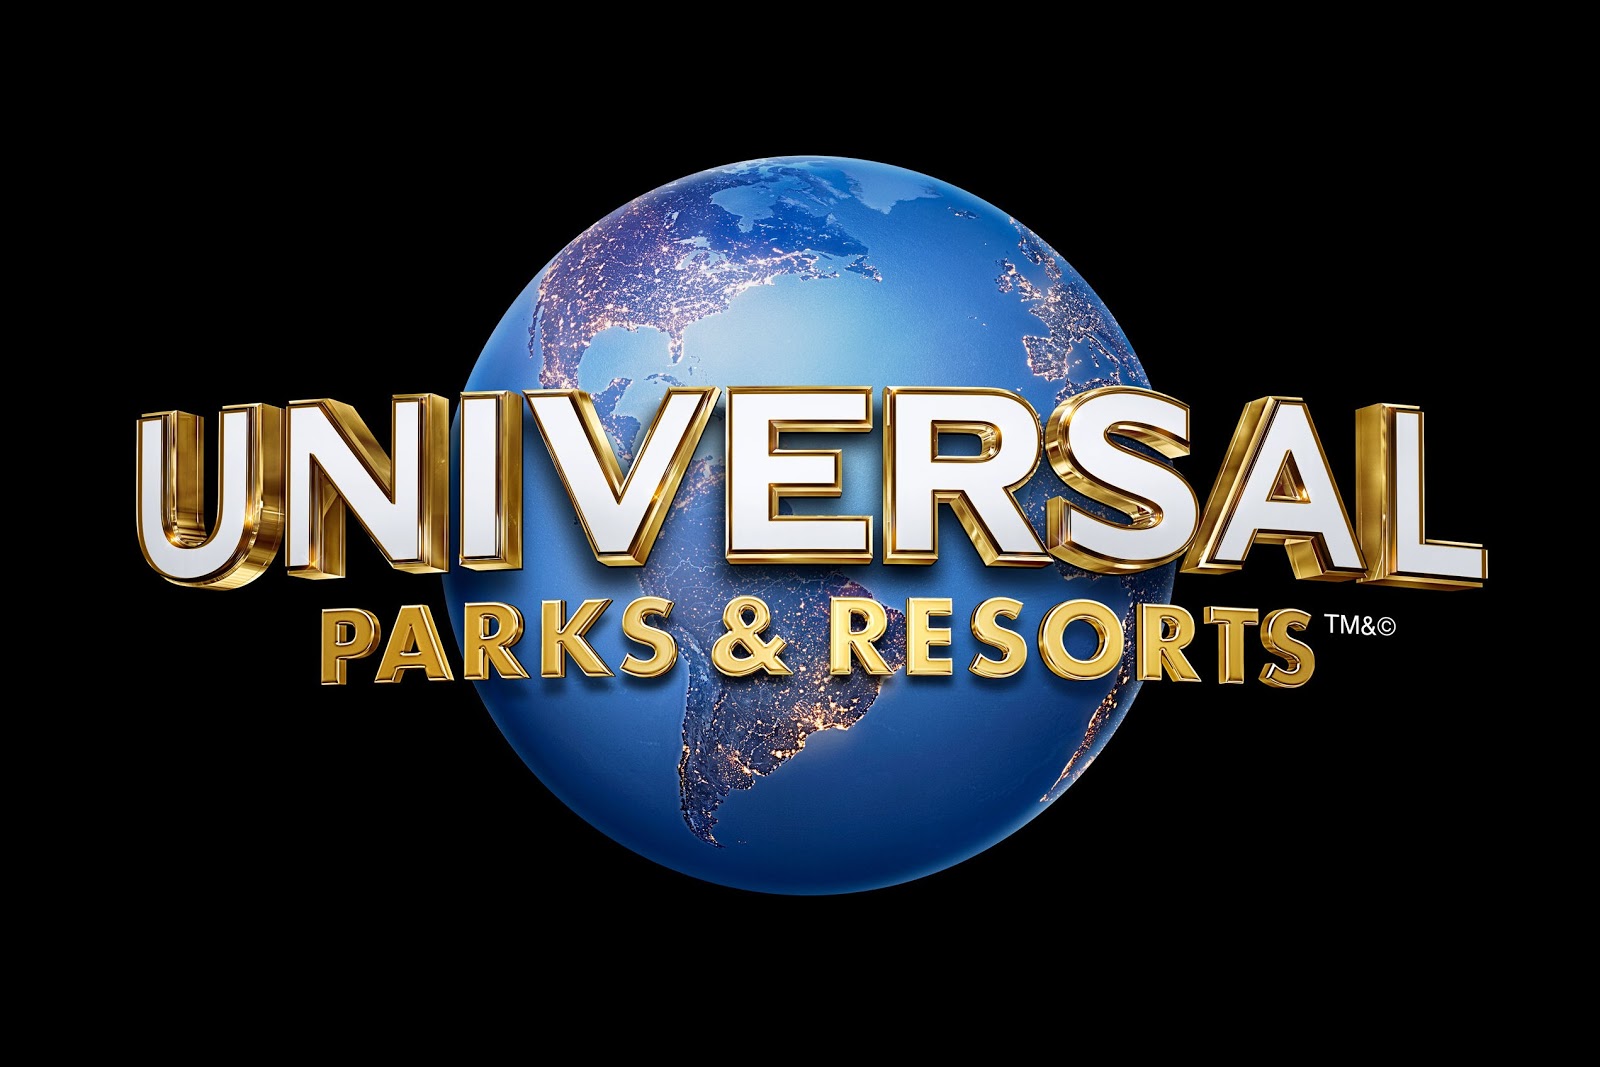 Universal Parks And Resorts Extend Closure Of Universal Orlando Universal Studios Hollywood Through May 31 